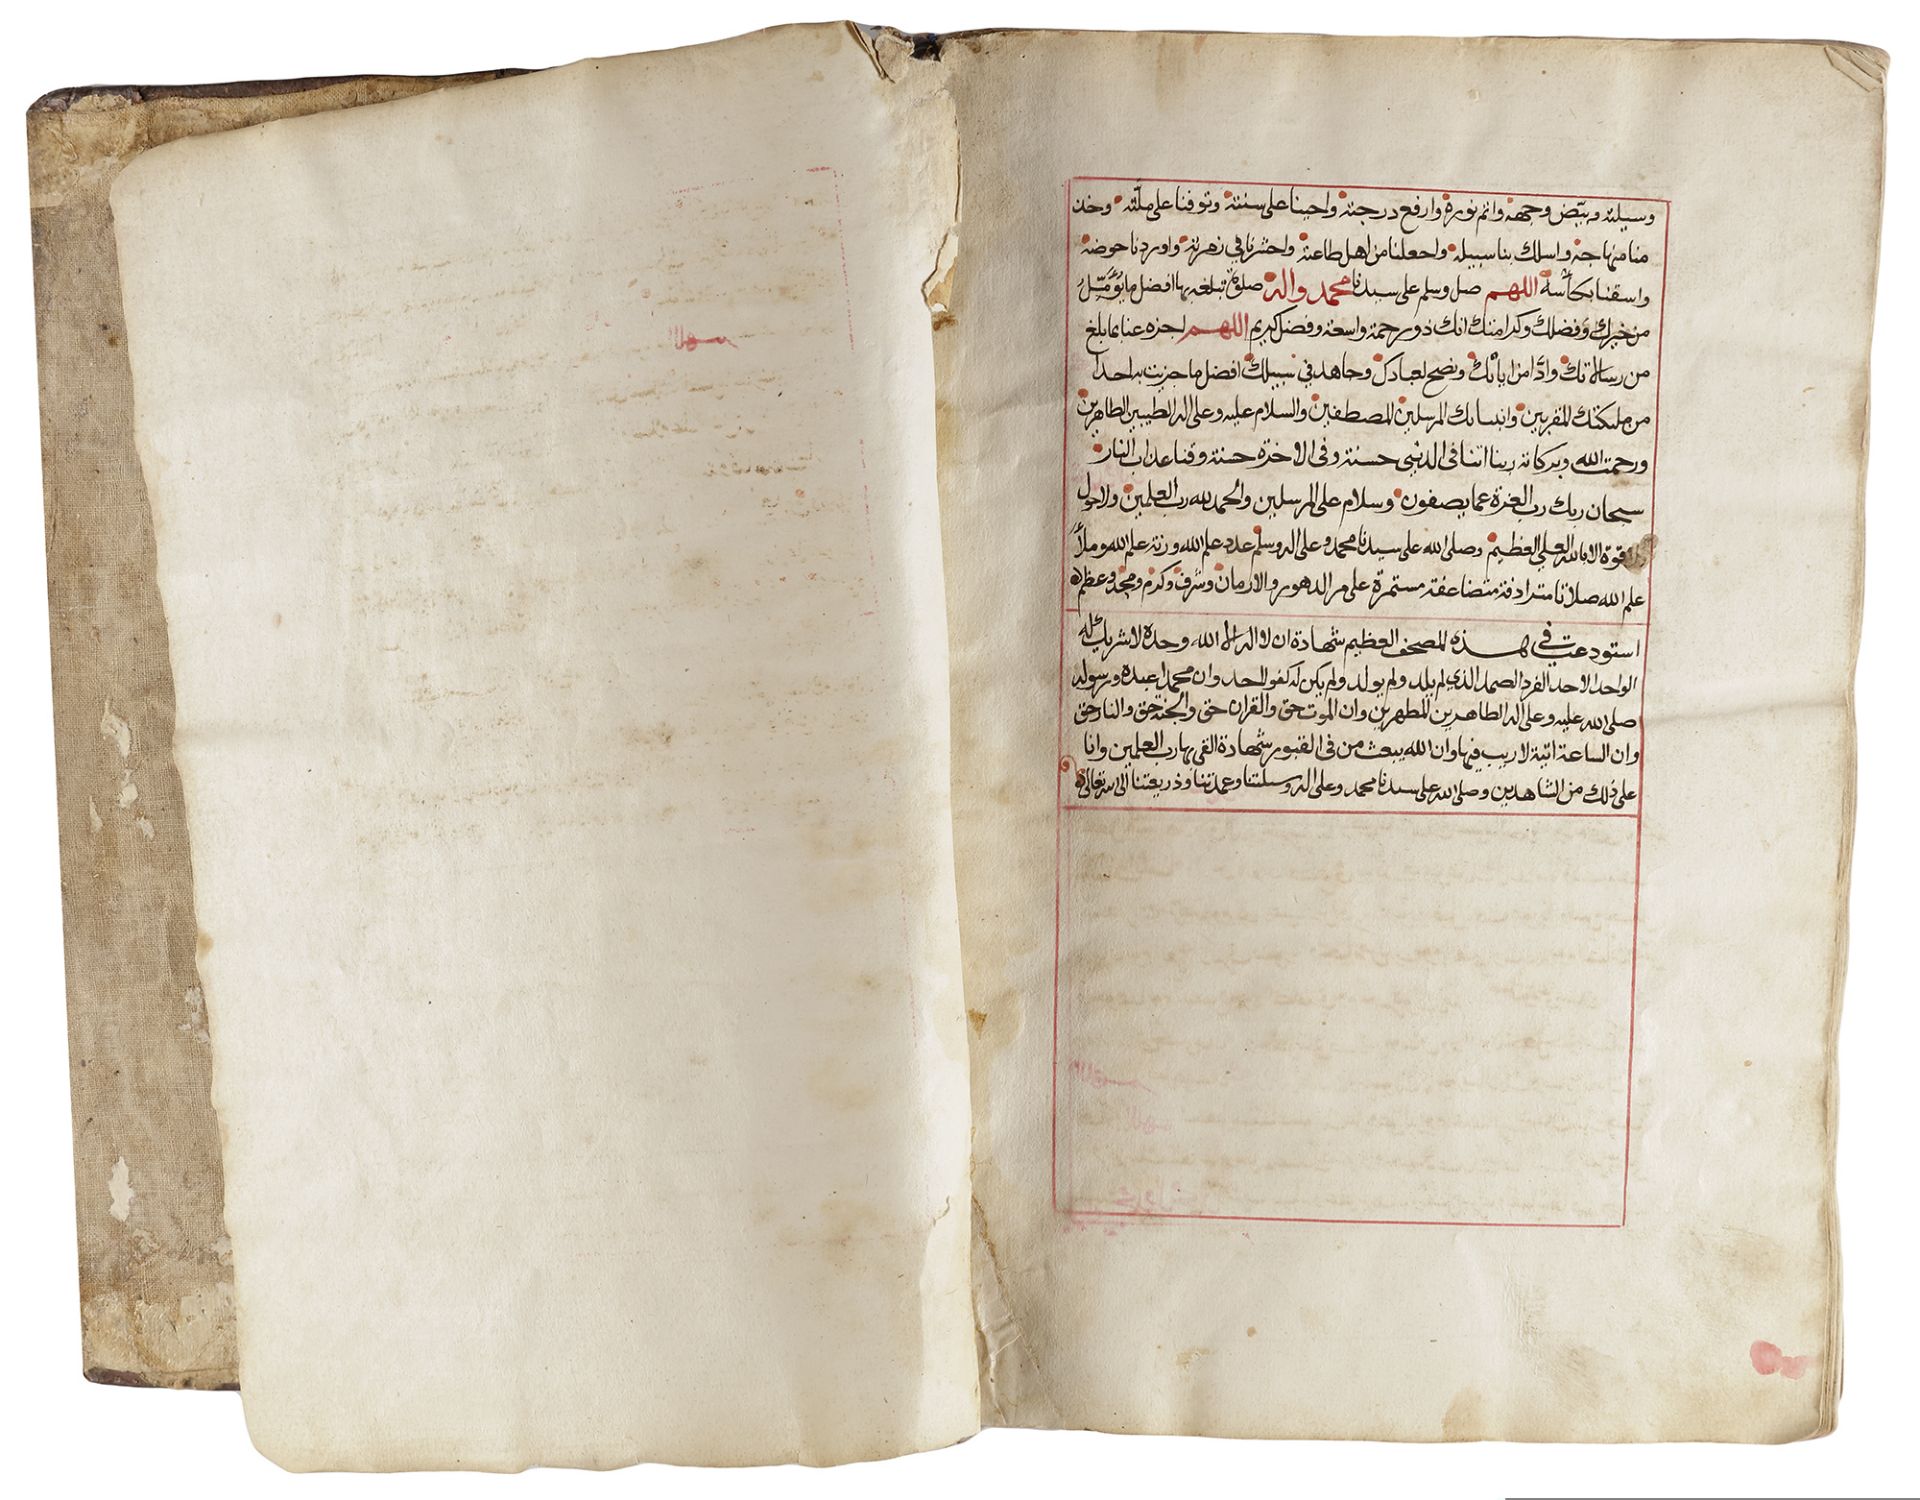 AN ILLUMINATED QURAN, YEMEN, BY AHMED QASEM IBN ISMAIL IN 1035 AH/1626 AD - Image 13 of 18